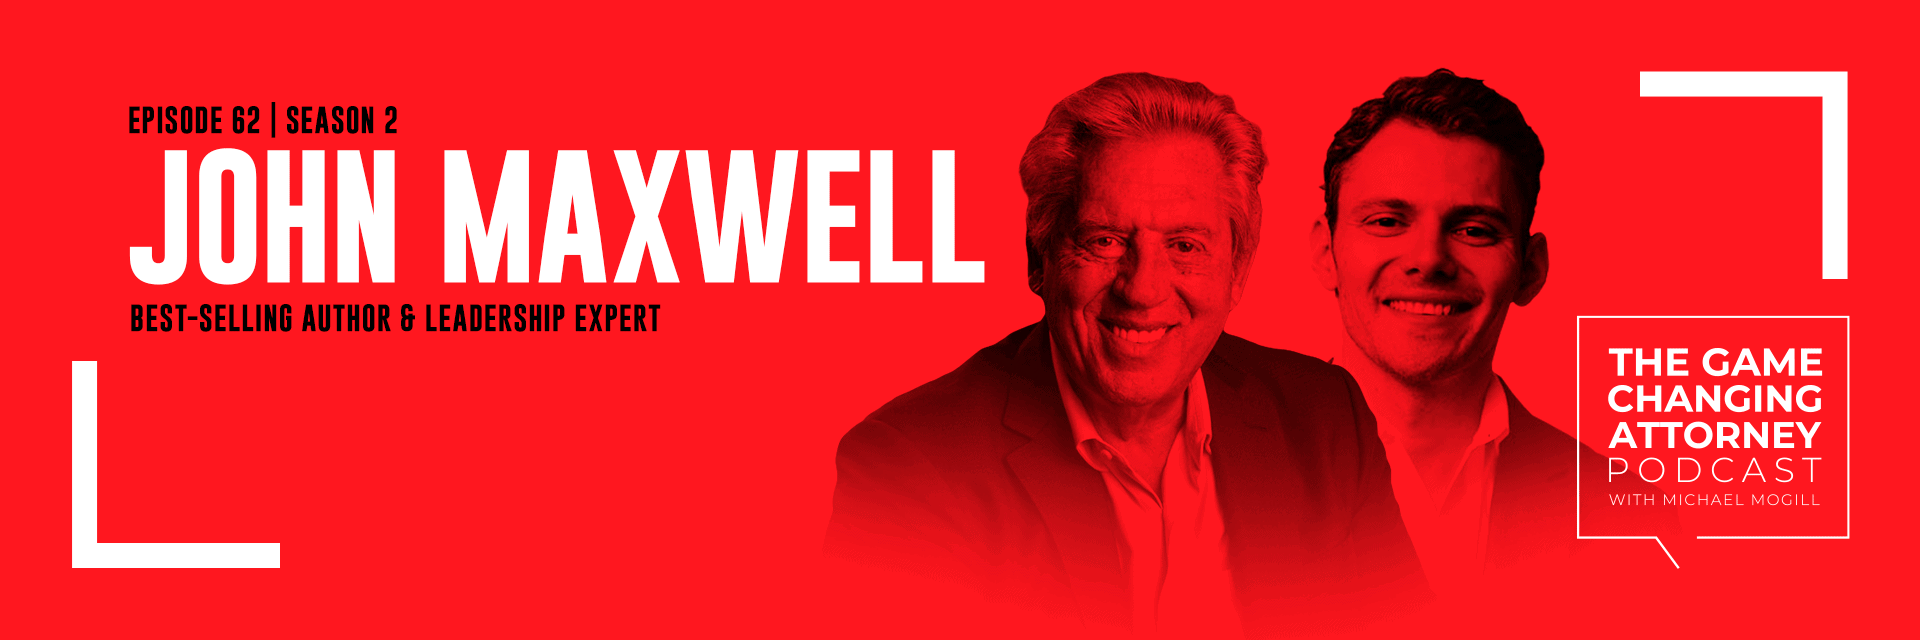 John Maxwell - The Game Changing Attorney Podcast - Desktop